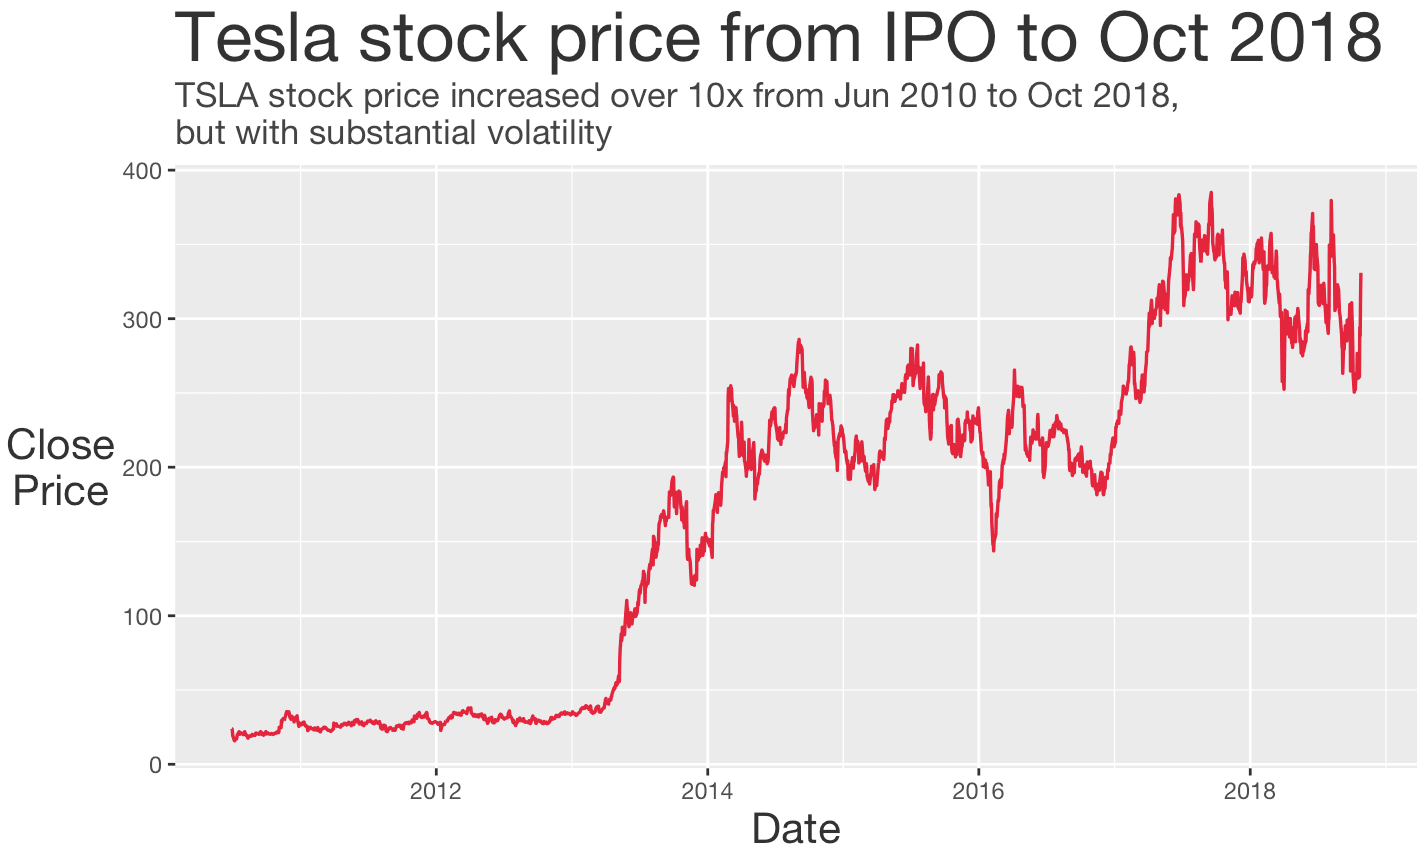 A formatted line chart of TSLA stock made with ggplot2 and geom_line.